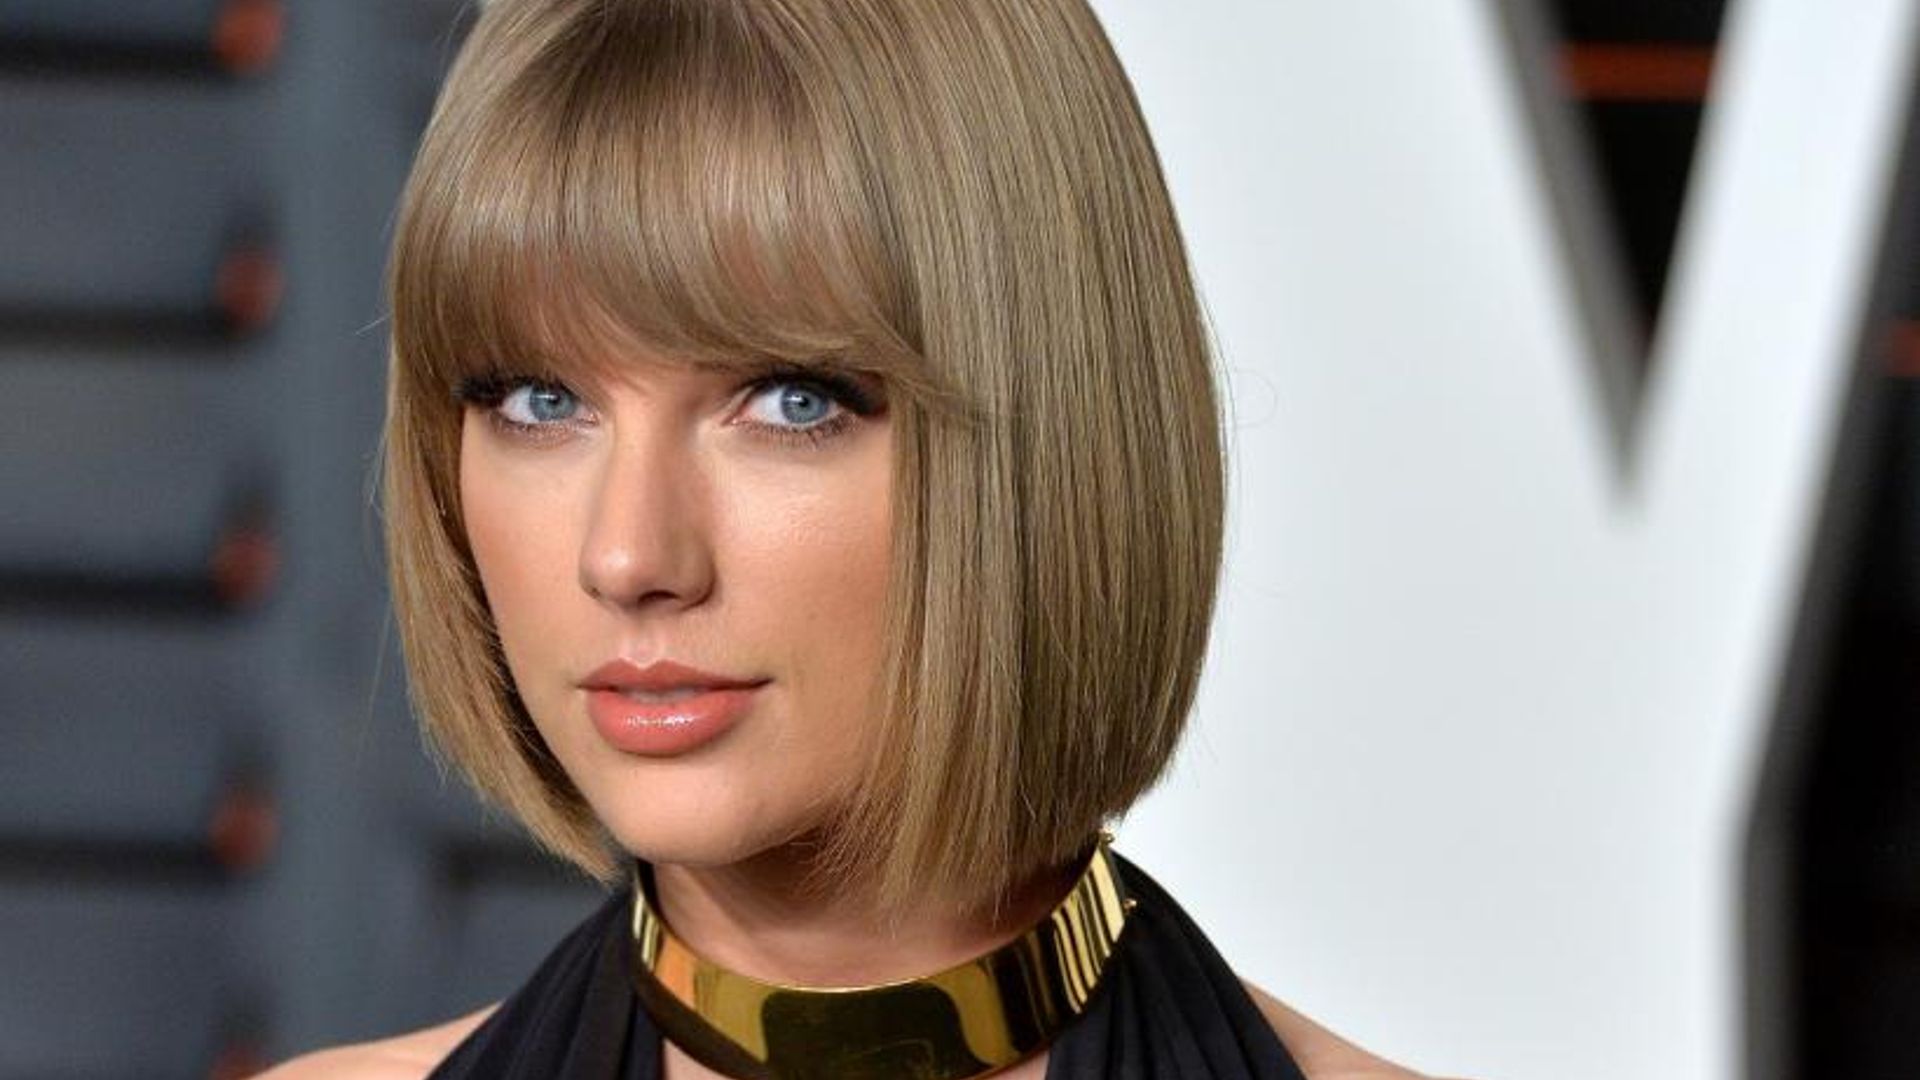 Taylor Swift's hilarious bridesmaid speech leaked online